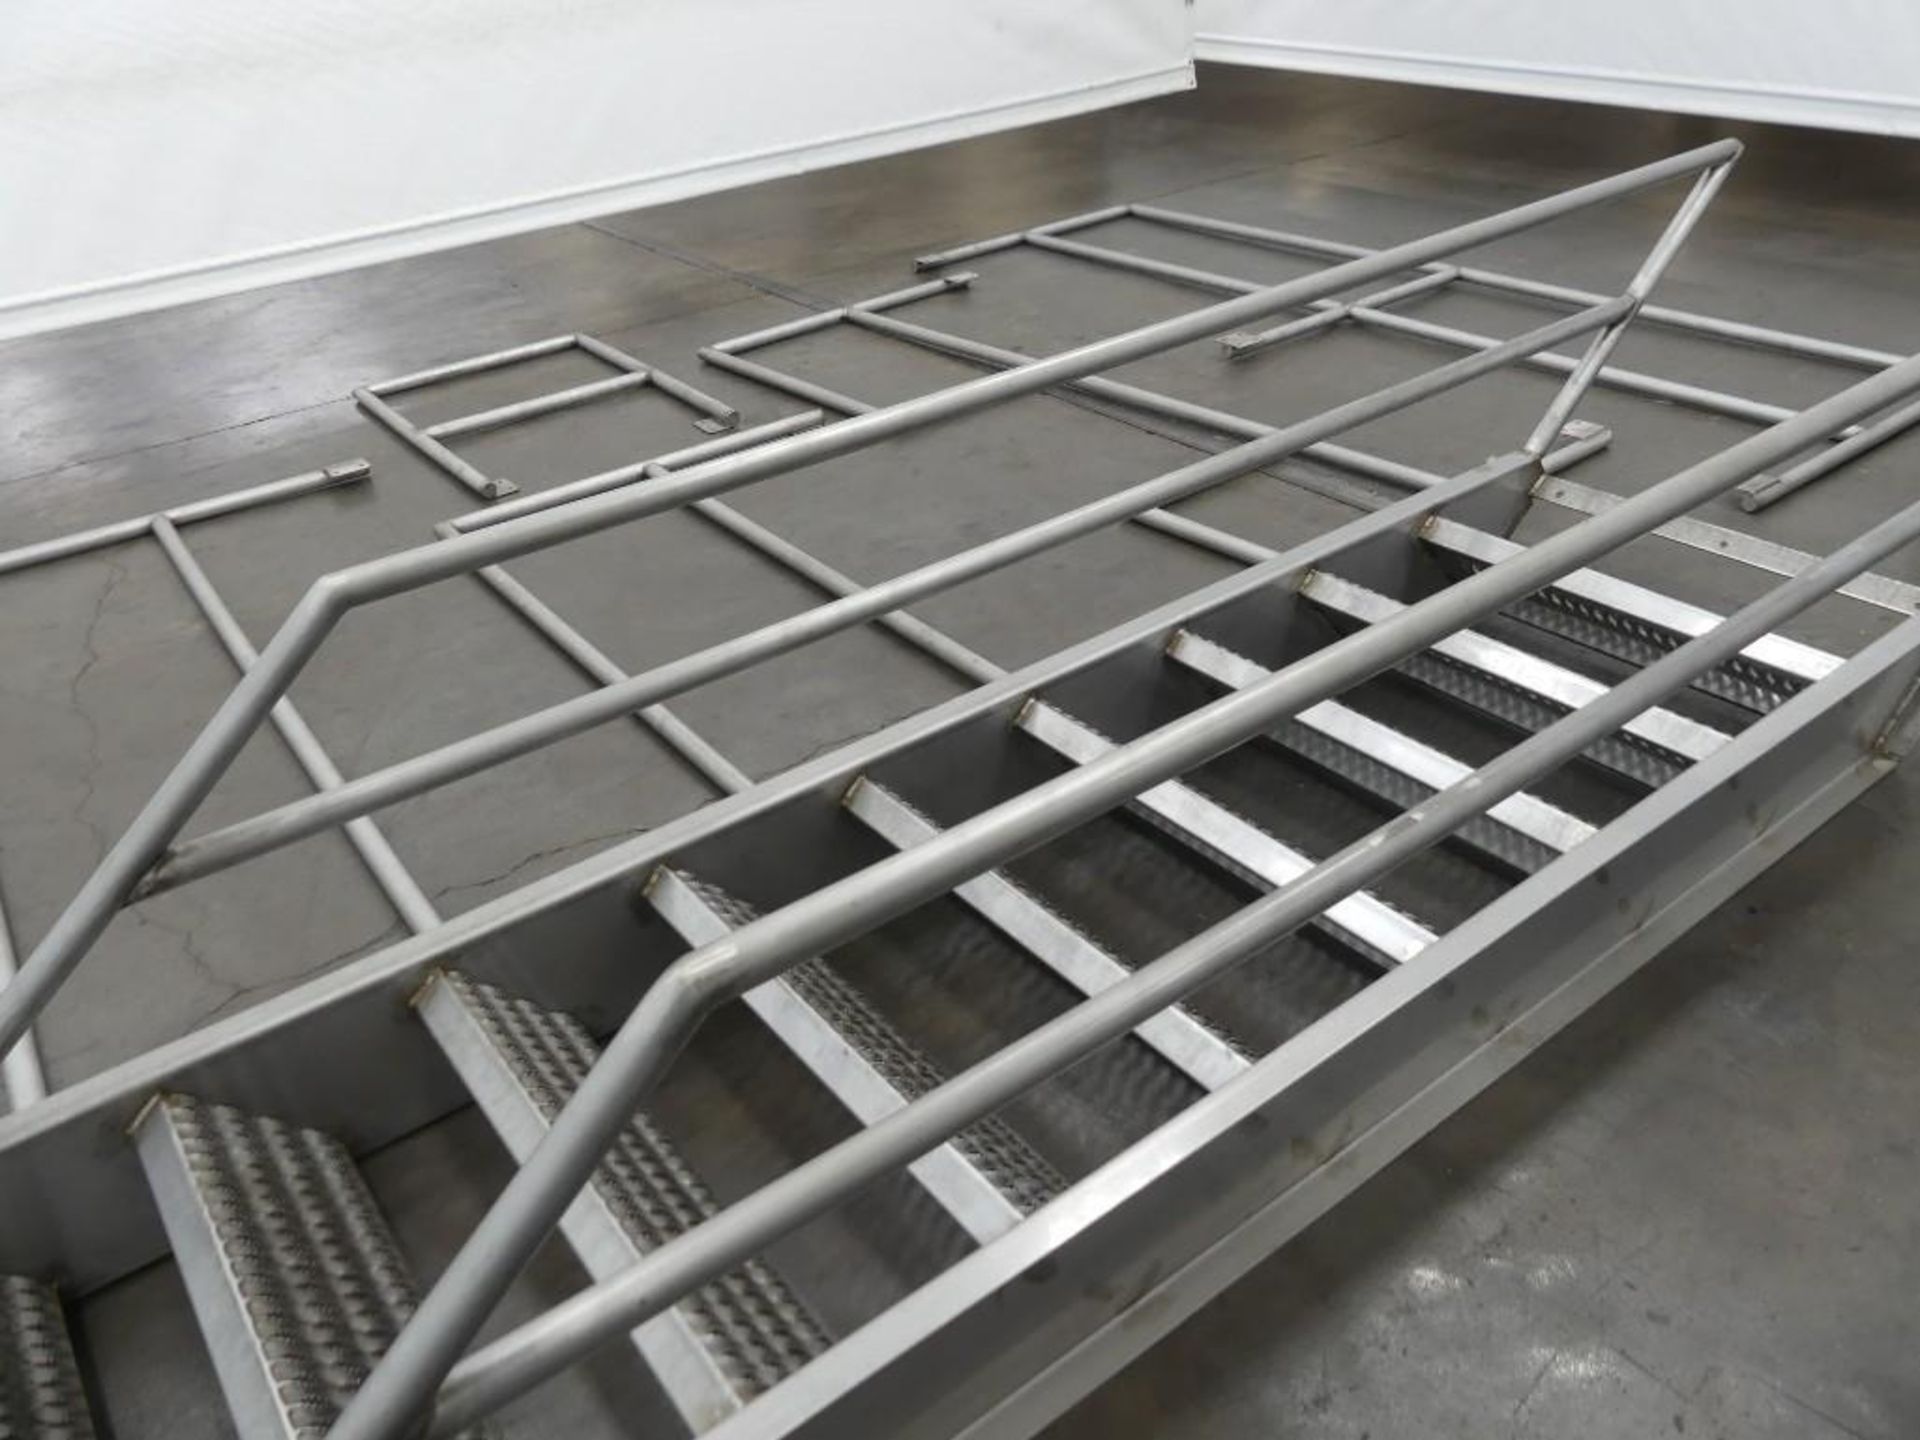 Stainless Steel Premade Bagging System - Image 17 of 24